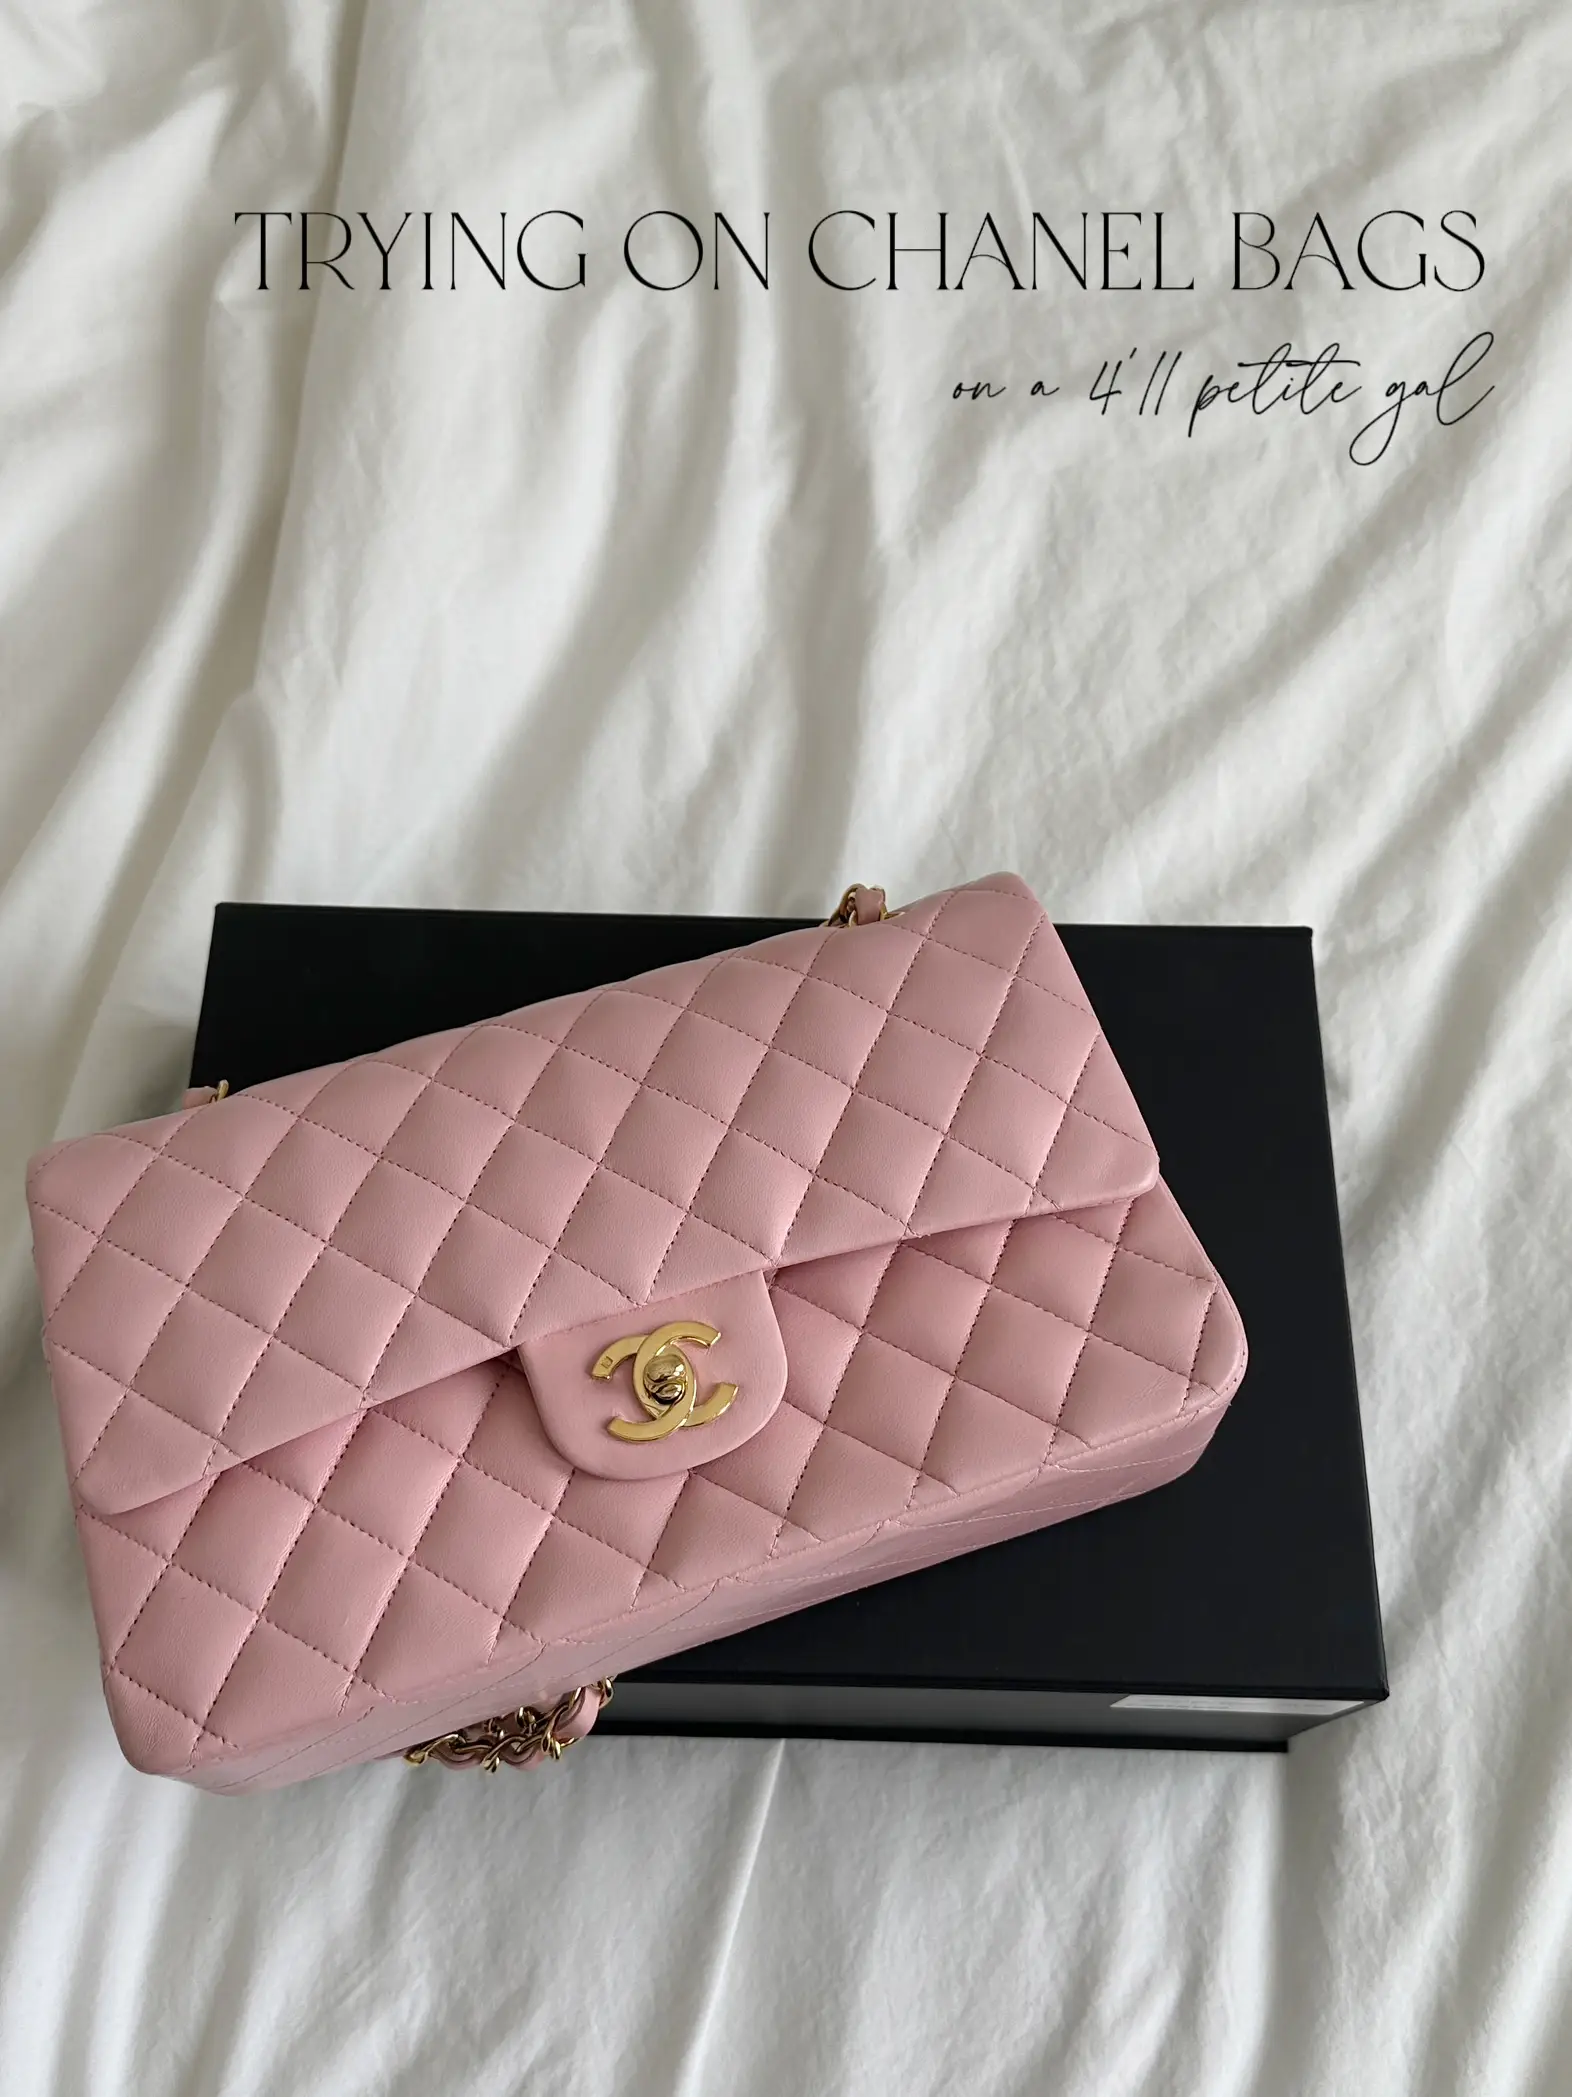 CHANEL MEDIUM CLASSIC FLAP VS THE MINI, Gallery posted by celesta